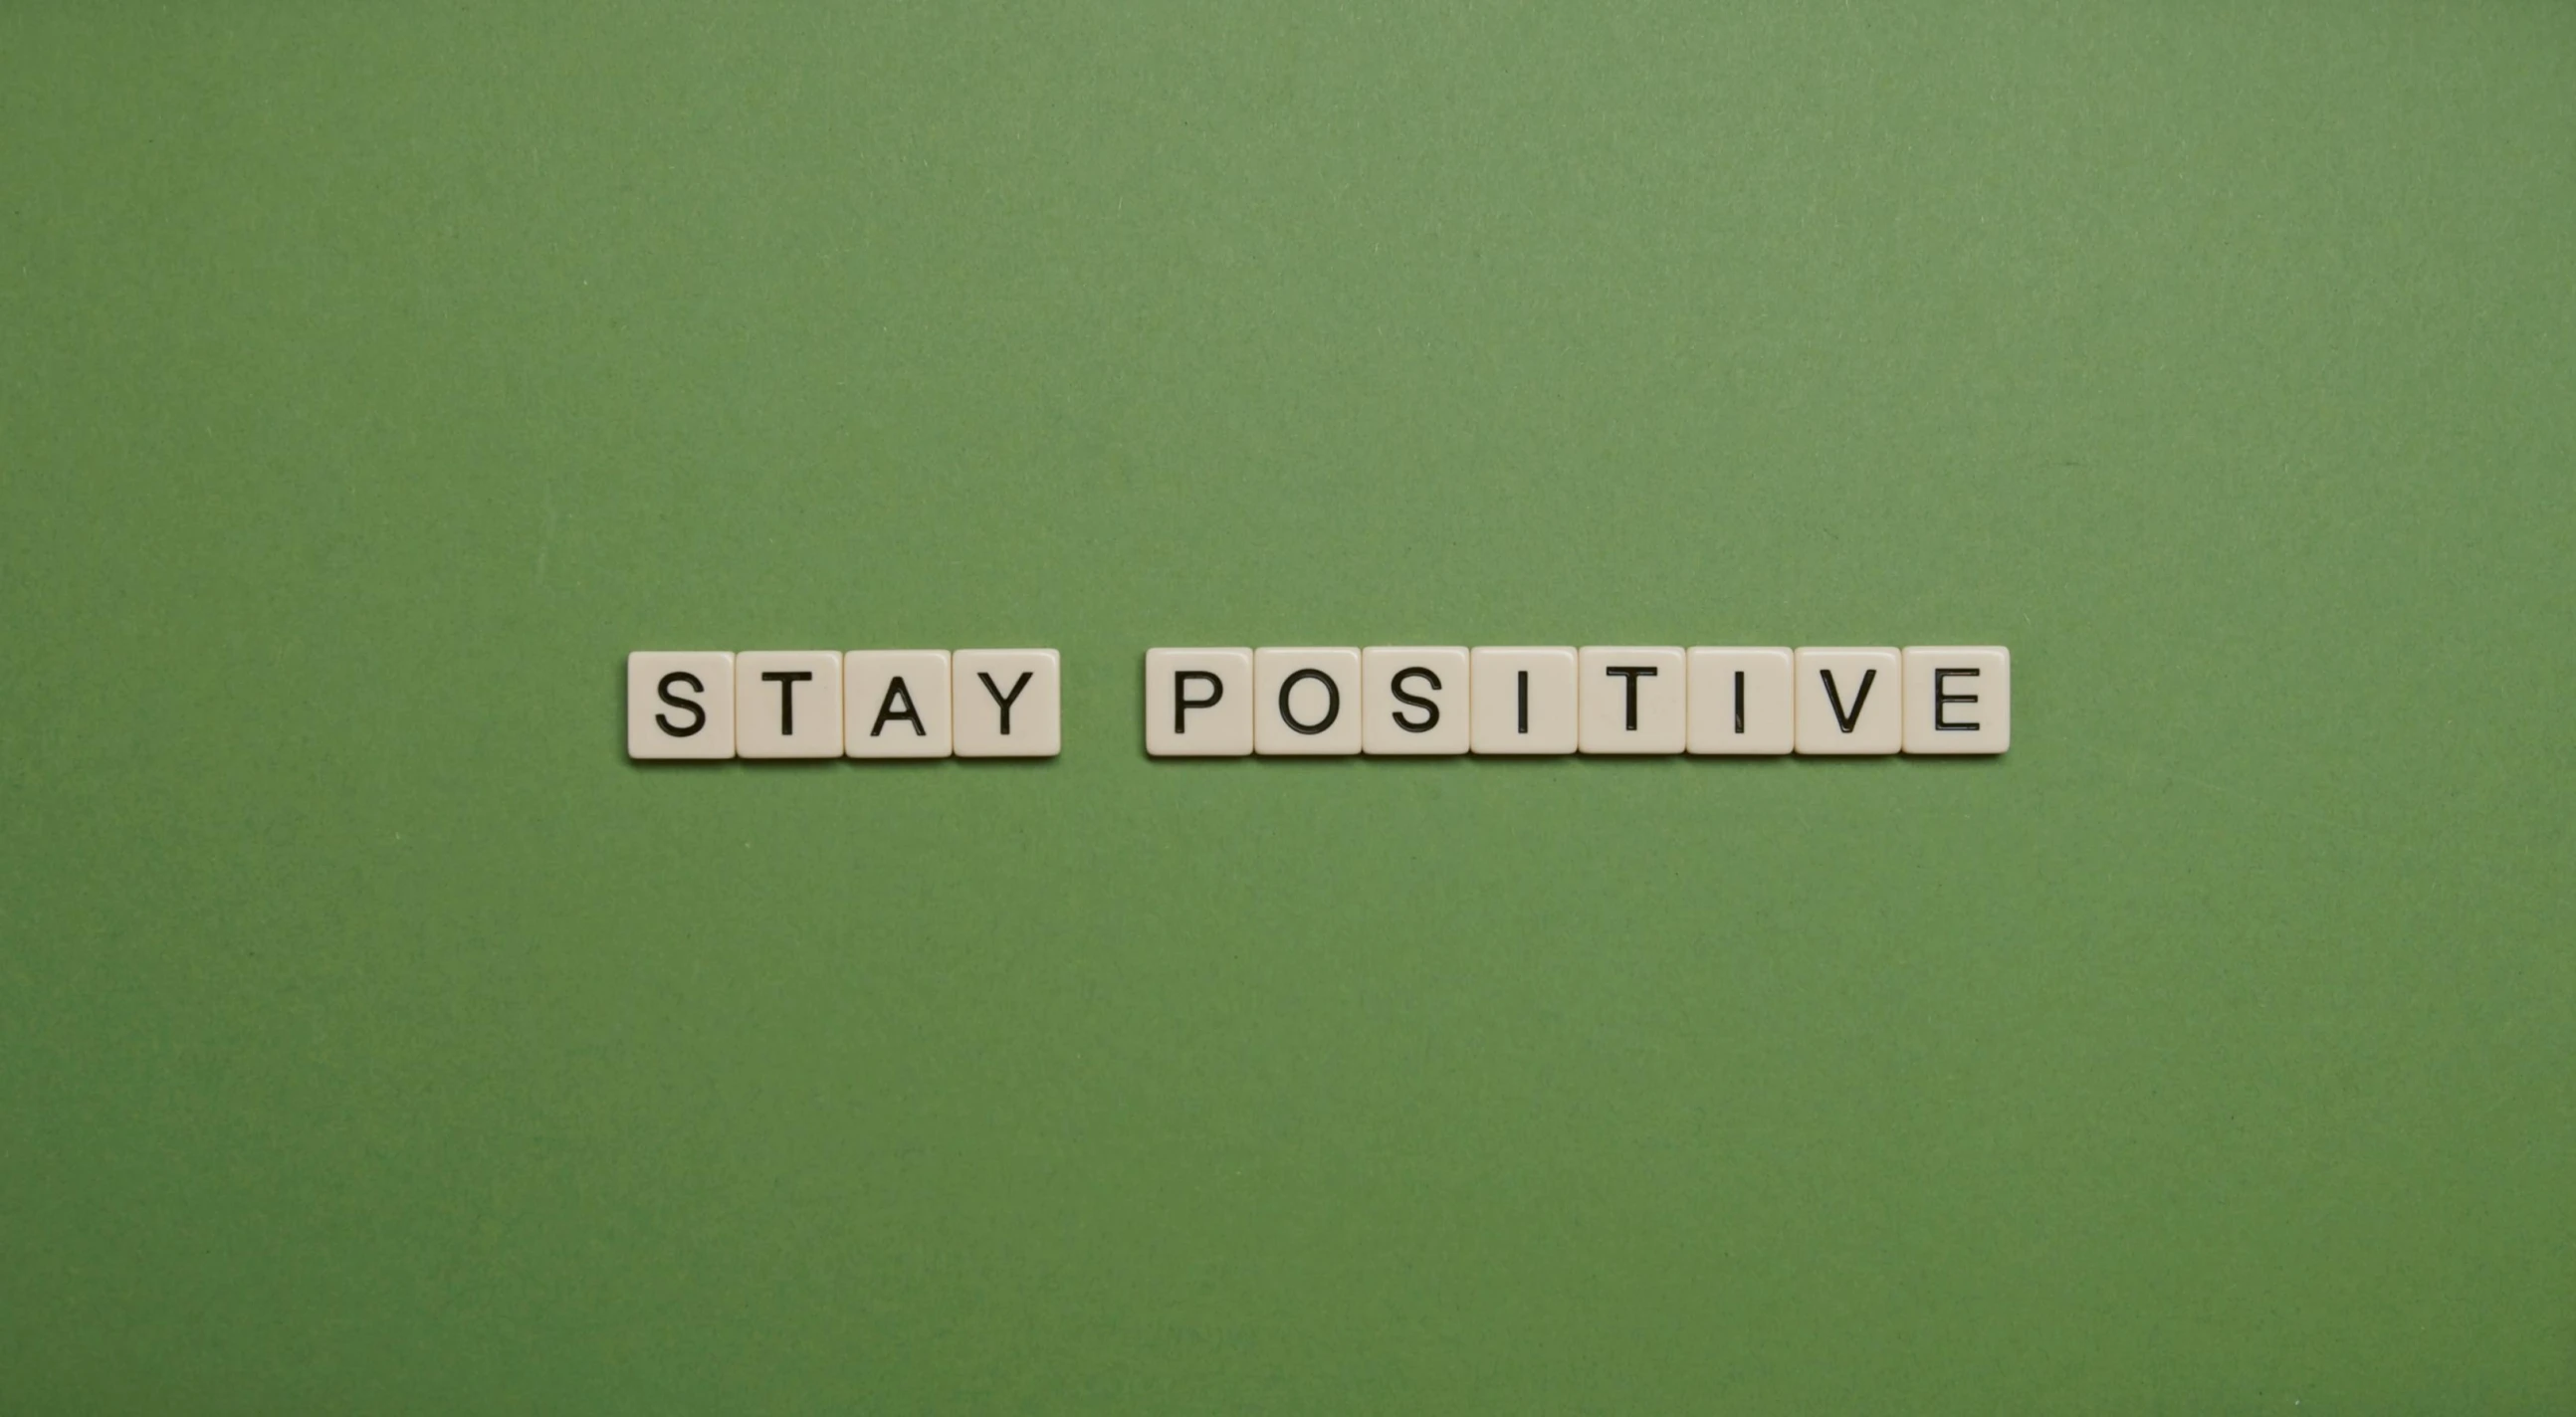 the word stay positive written on a green surface